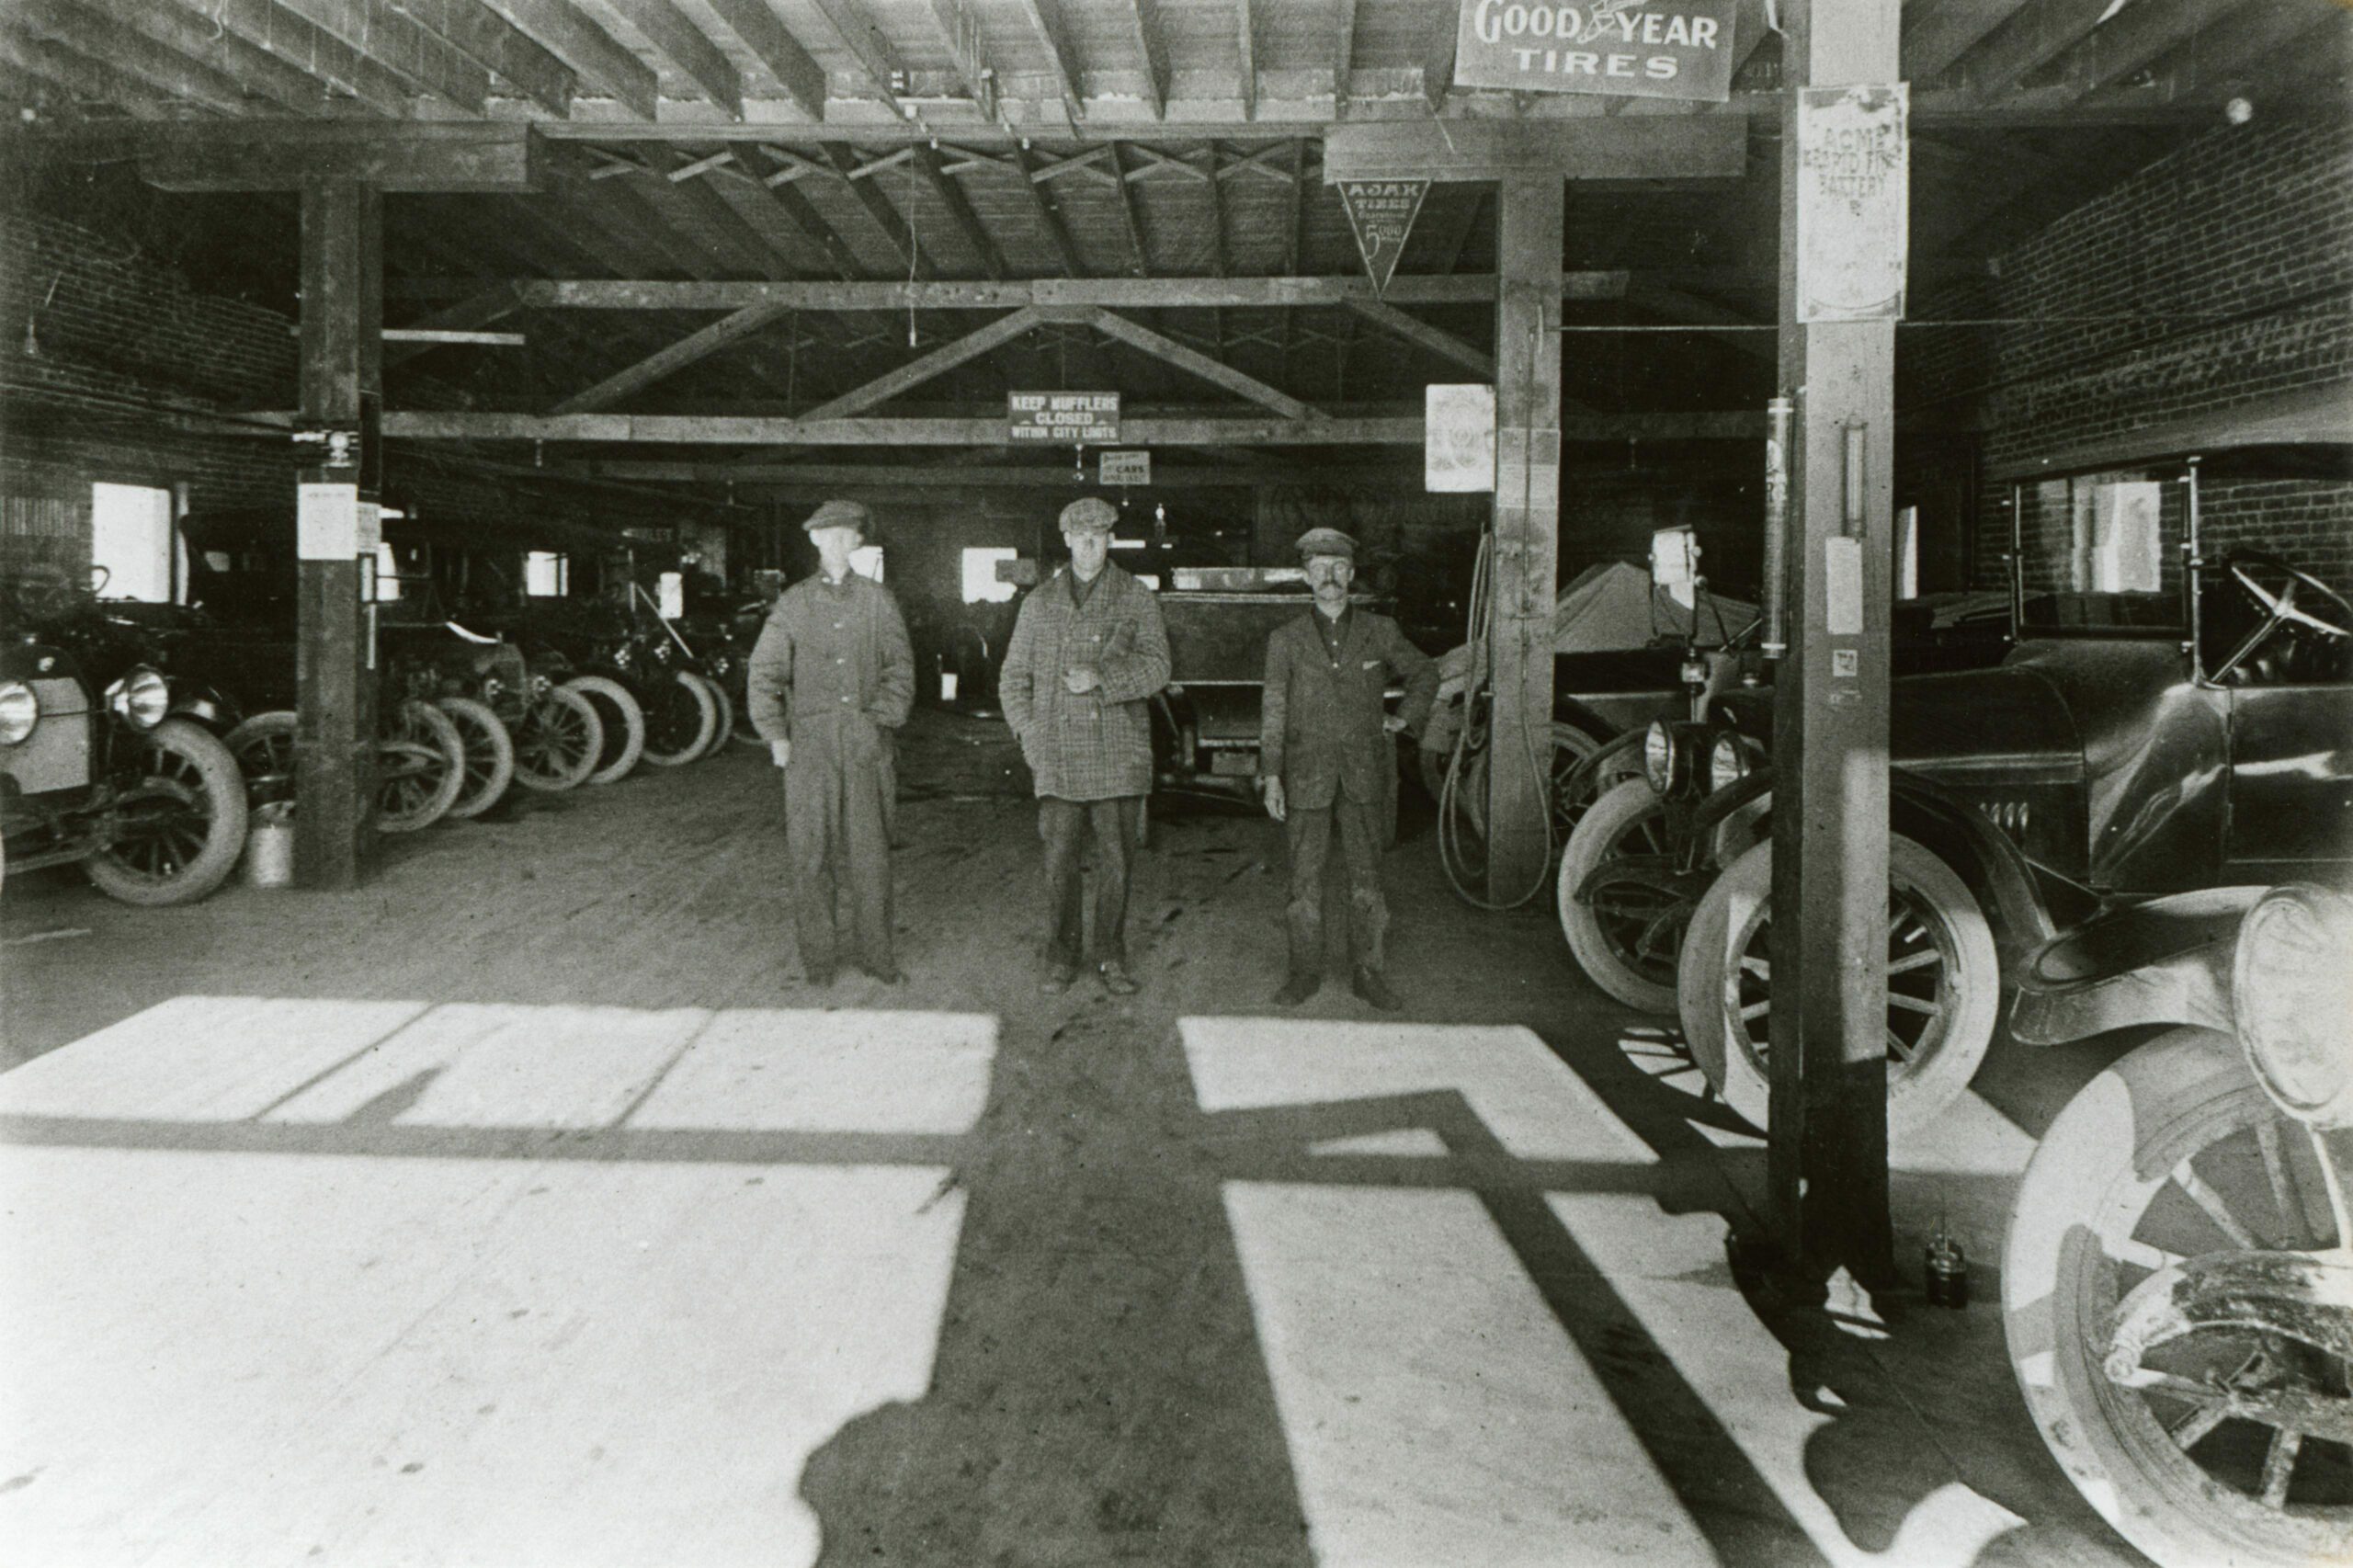 Possibly inside the Colorado Auto Company - Signs read “Good Year Tires,” “Ajax Tires,” “Acme Rapid Fire Battery,” “KEEP MUFFLERS CLOSED WITHIN CITY LIMITS”